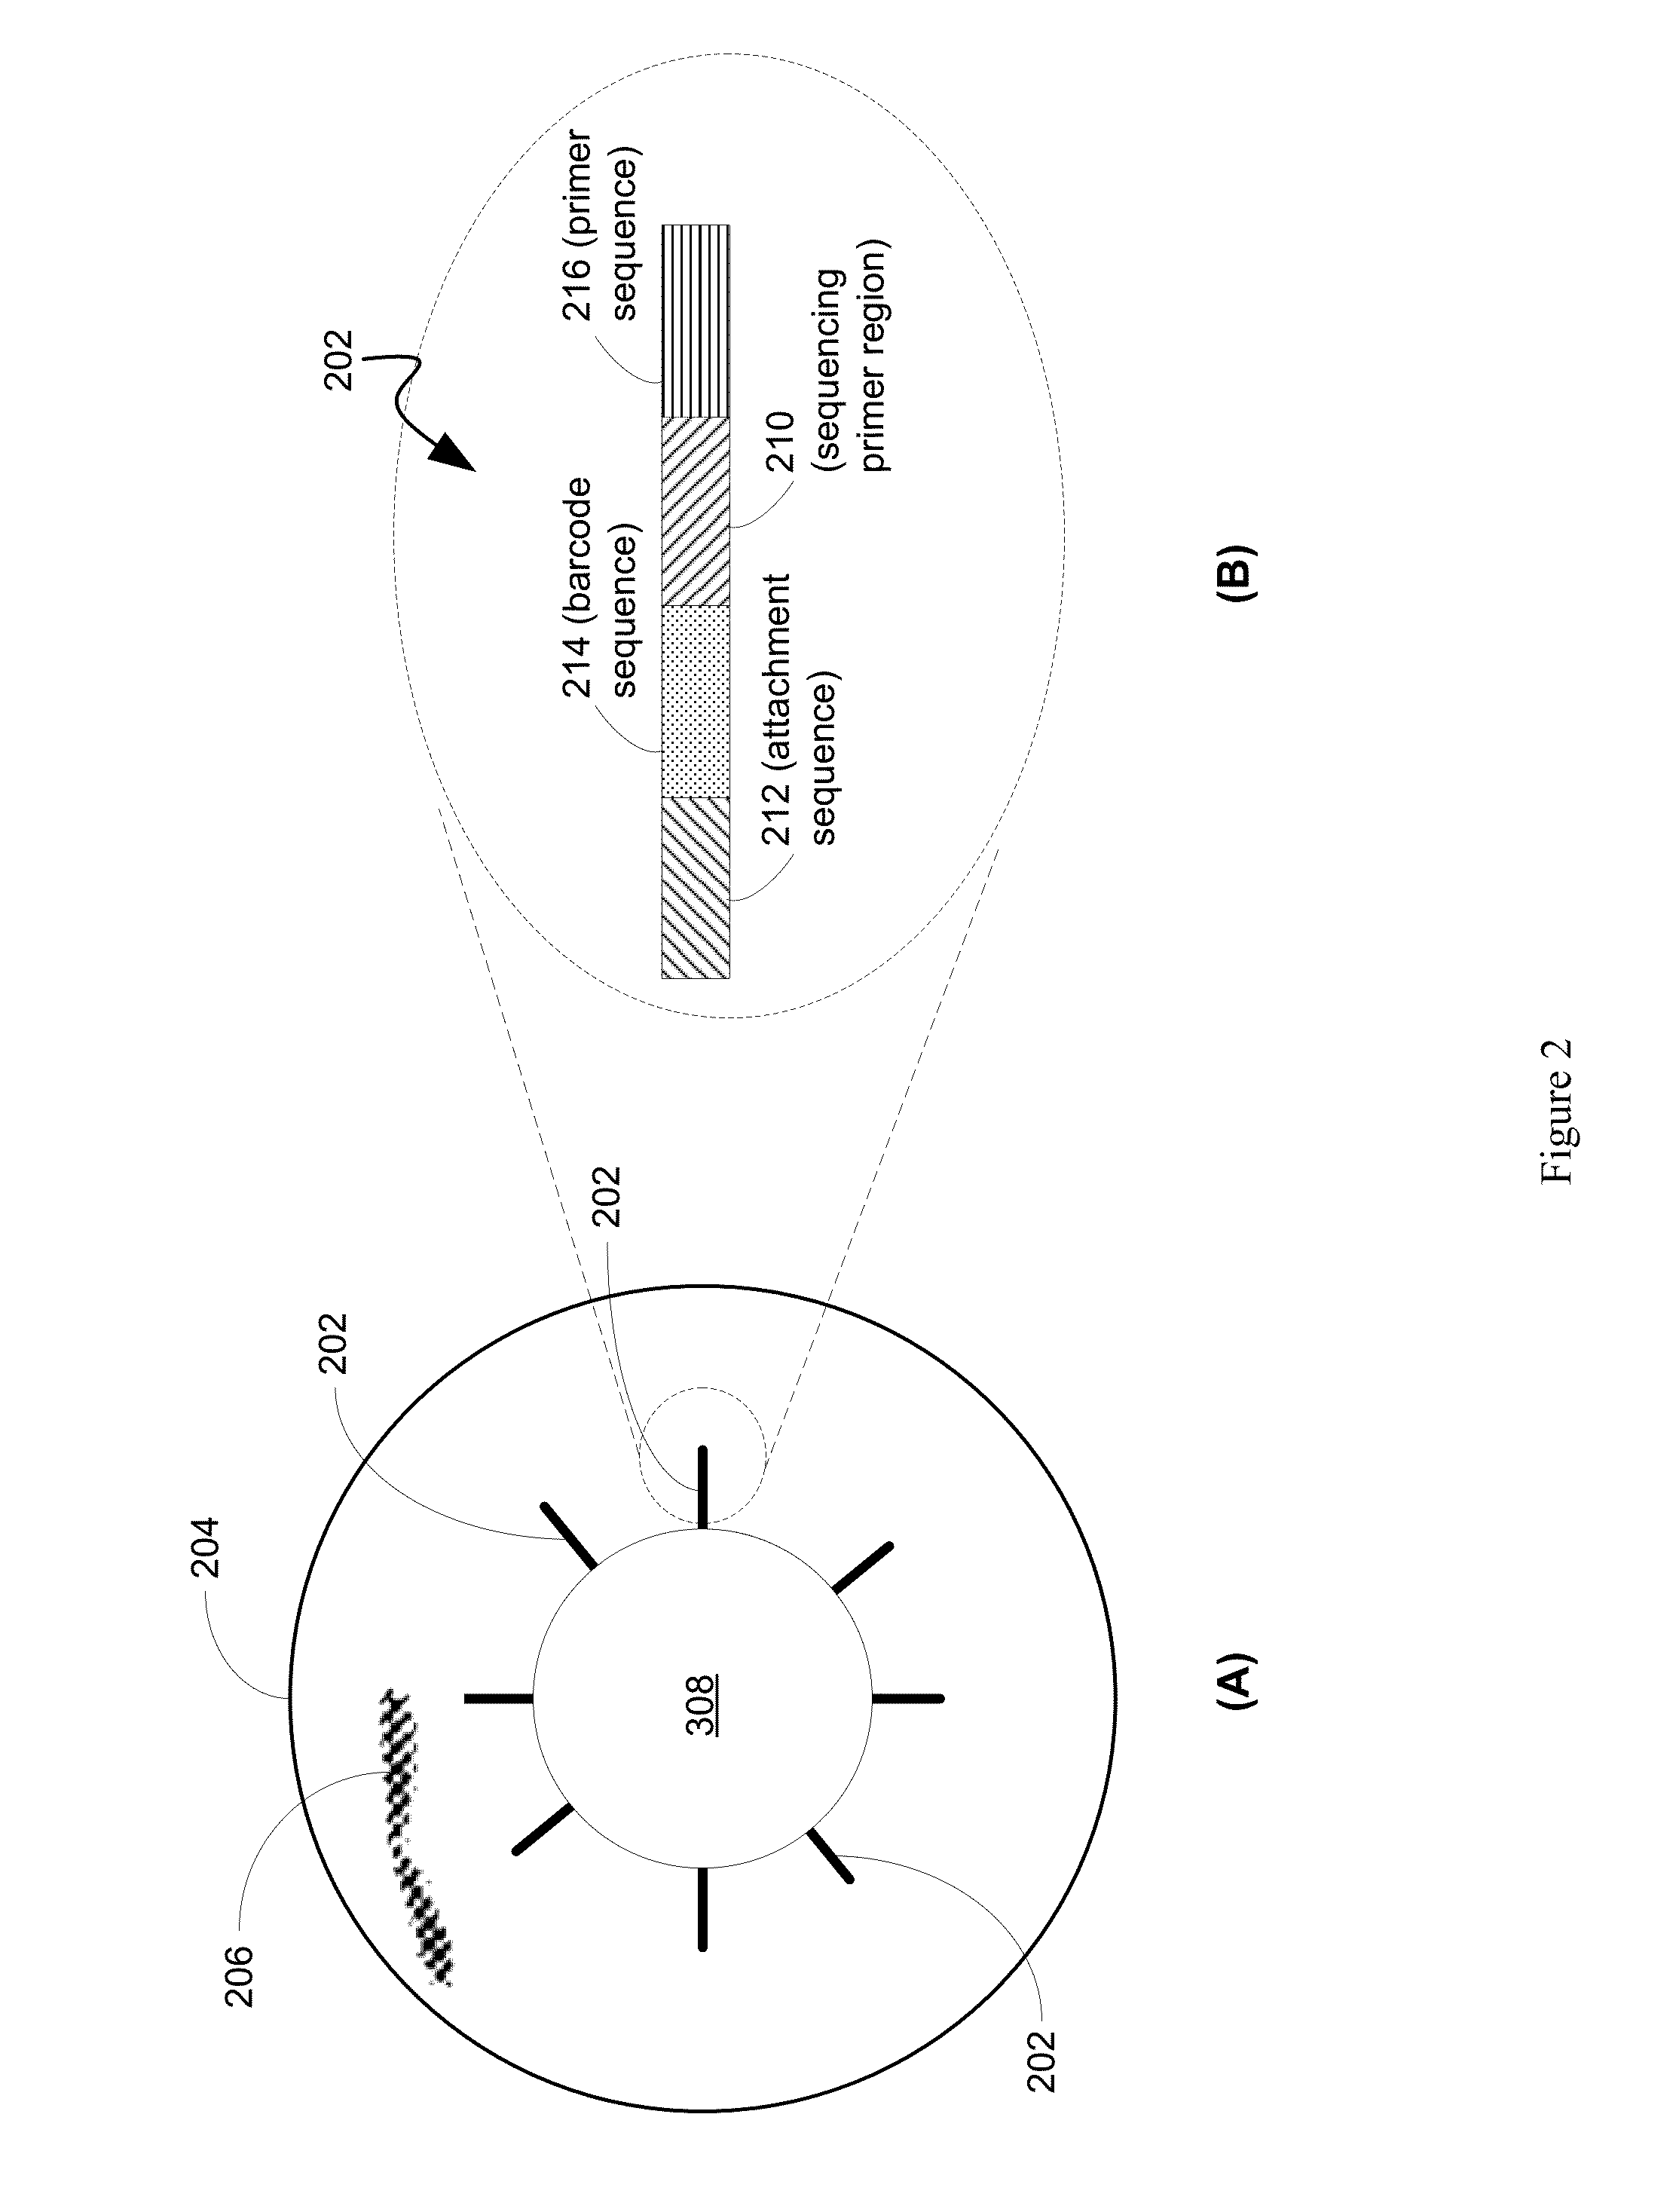 Systems and methods for visualizing structural variation and phasing information